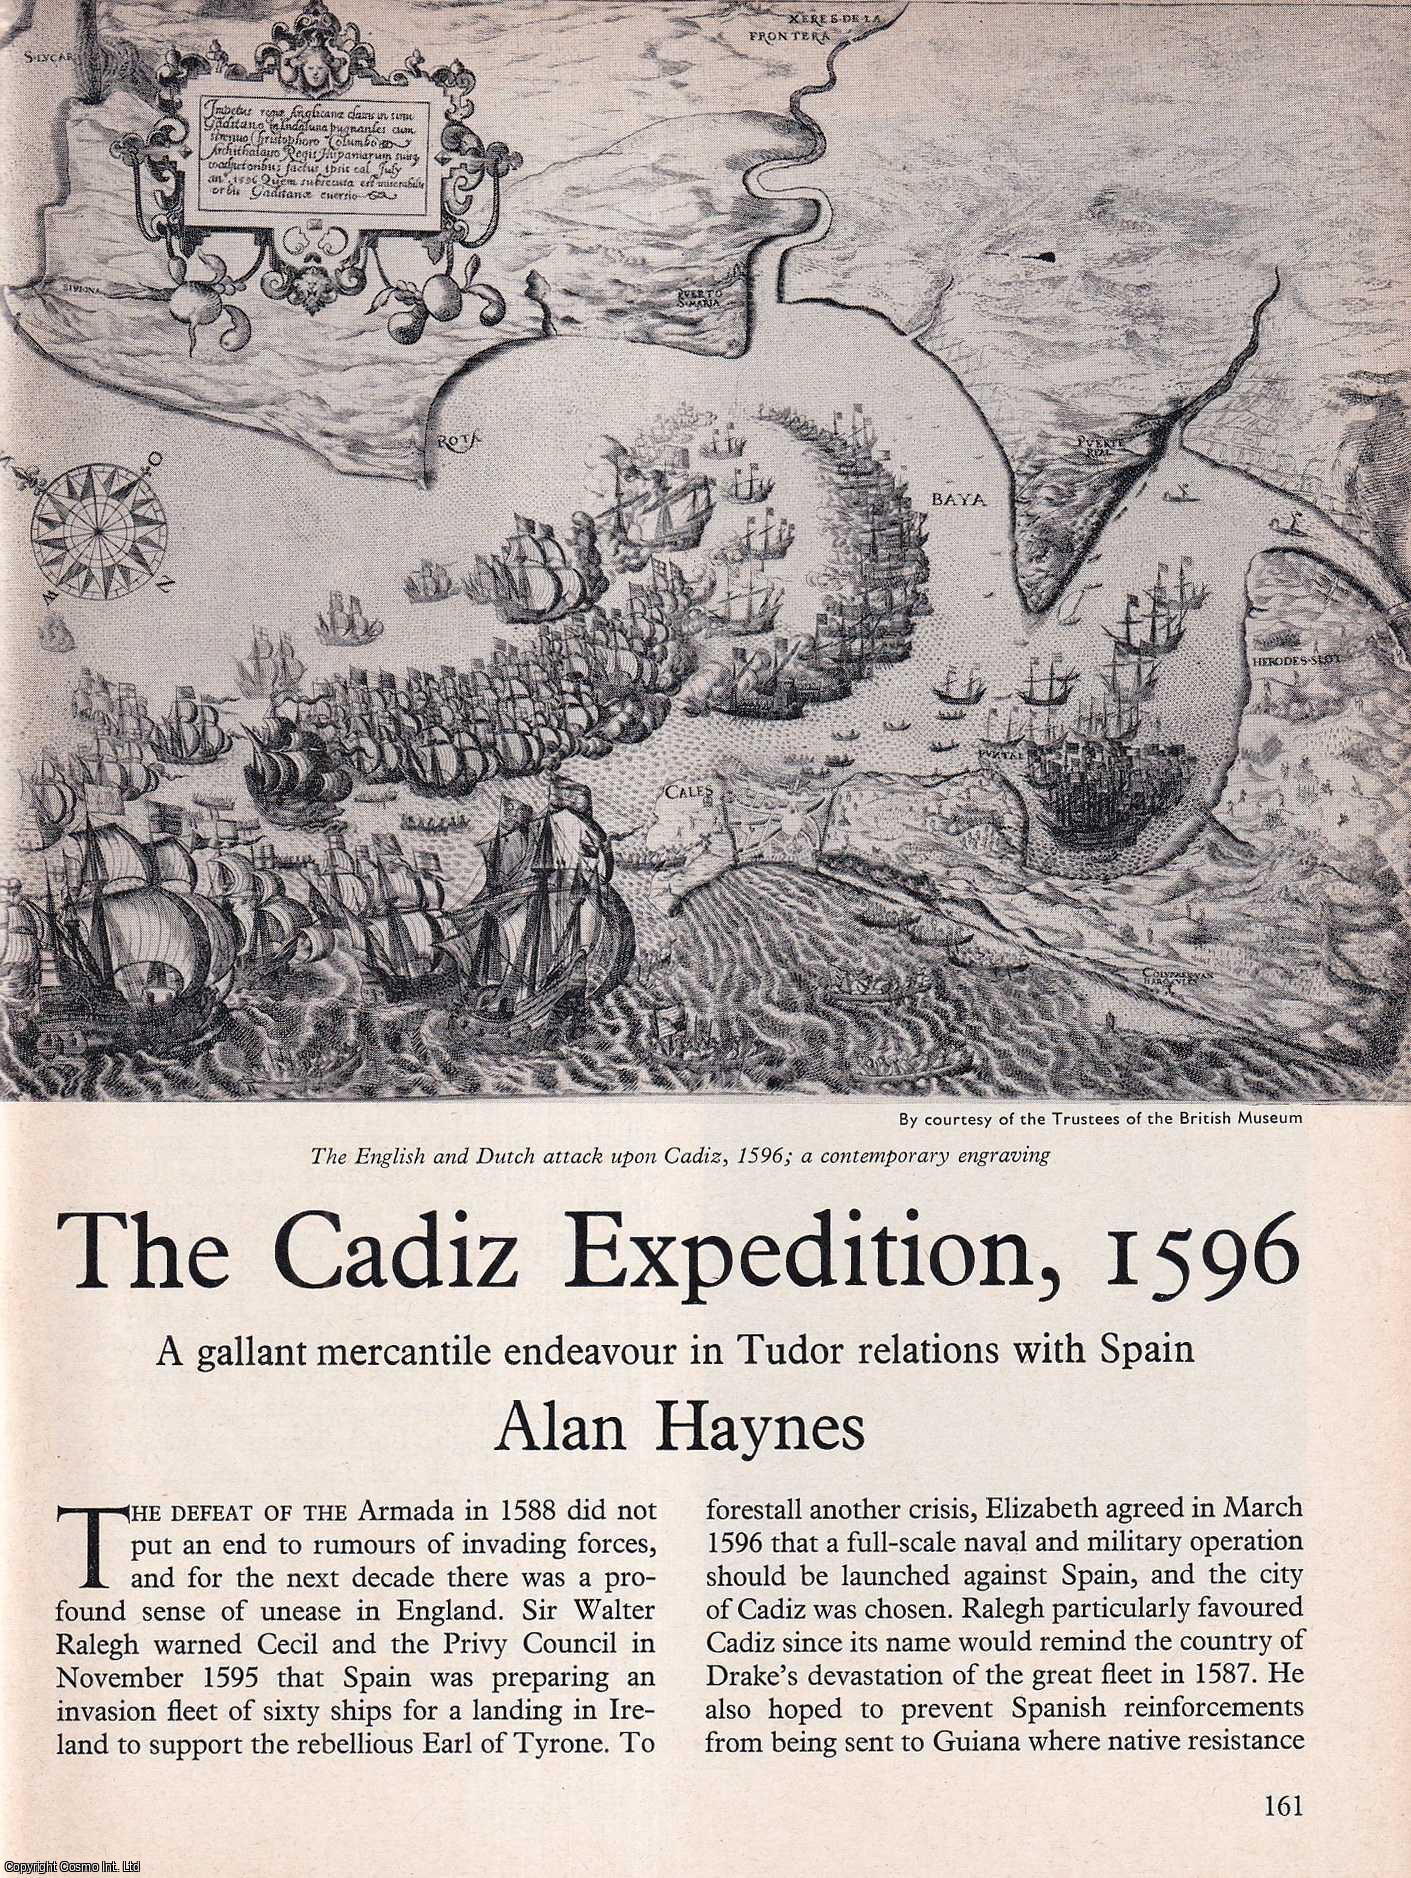 Alan Haynes - The Cadiz Expedition, 1596: A Gallant Mercantile Endeavour in Tudor Relations with Spain. An original article from History Today magazine, 1973.